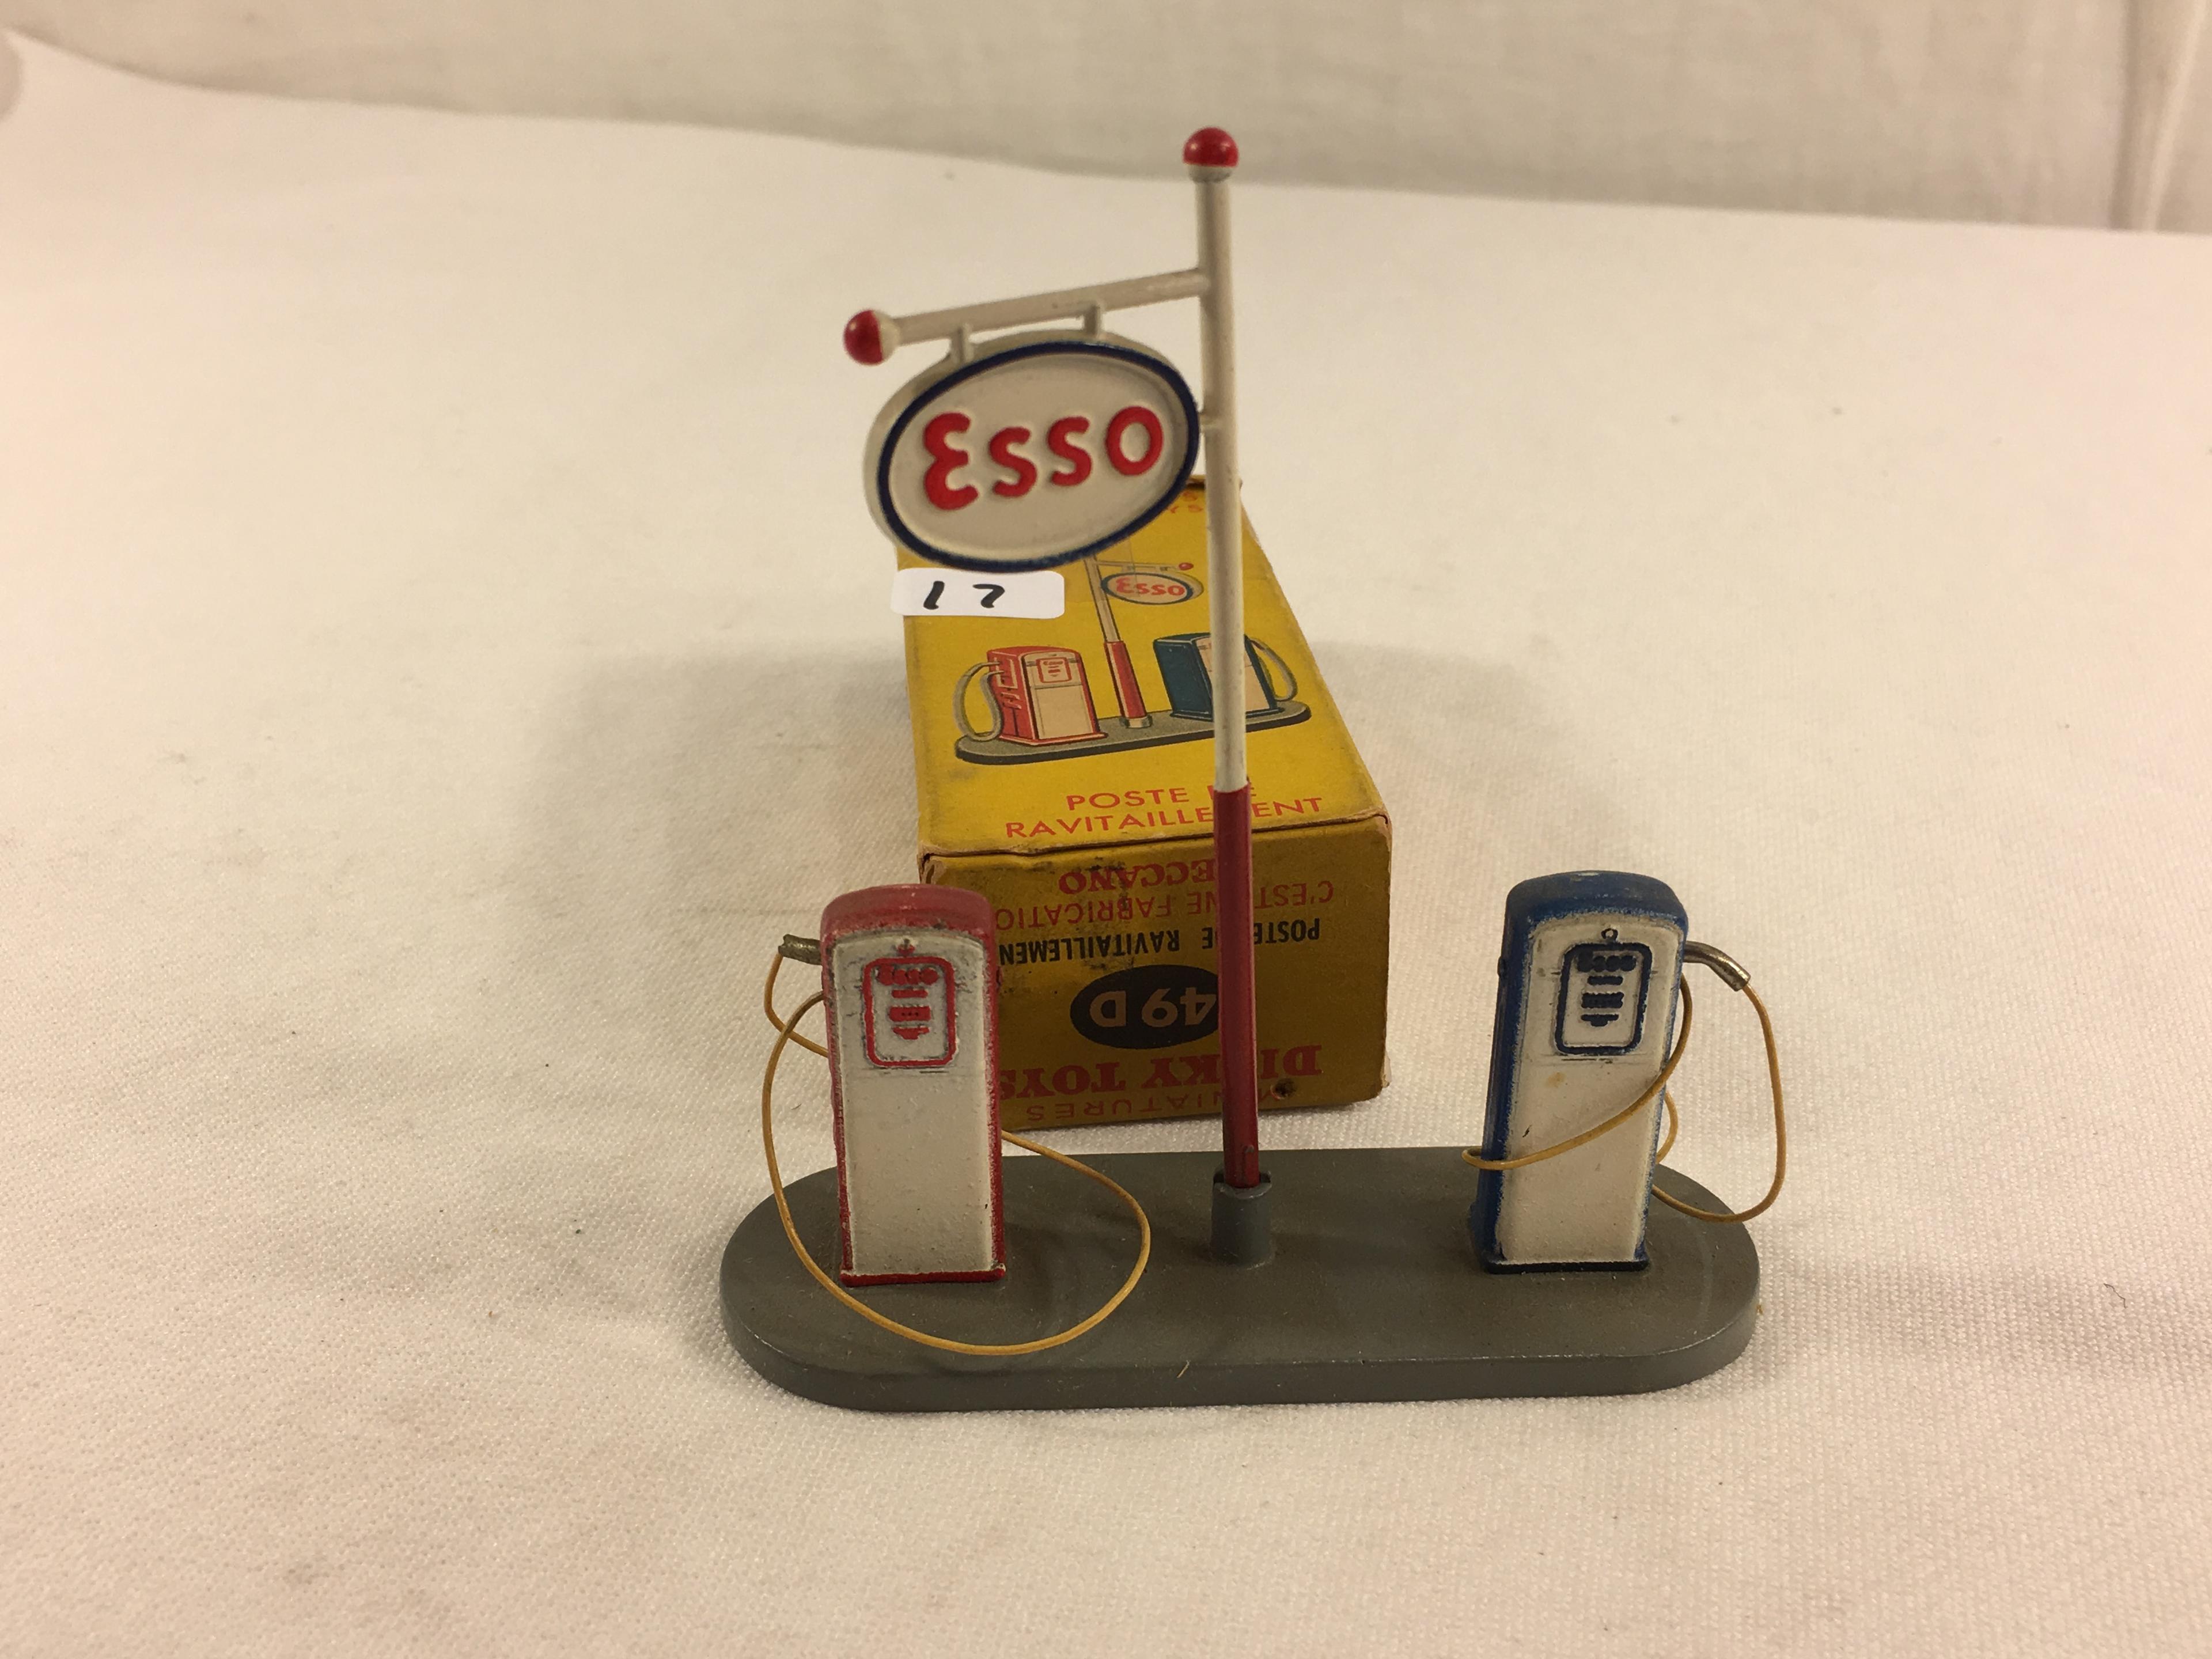 Collector Vintage Dinky Toys No.49D Poste De Revitaillement Made in England By Meccano W/Box